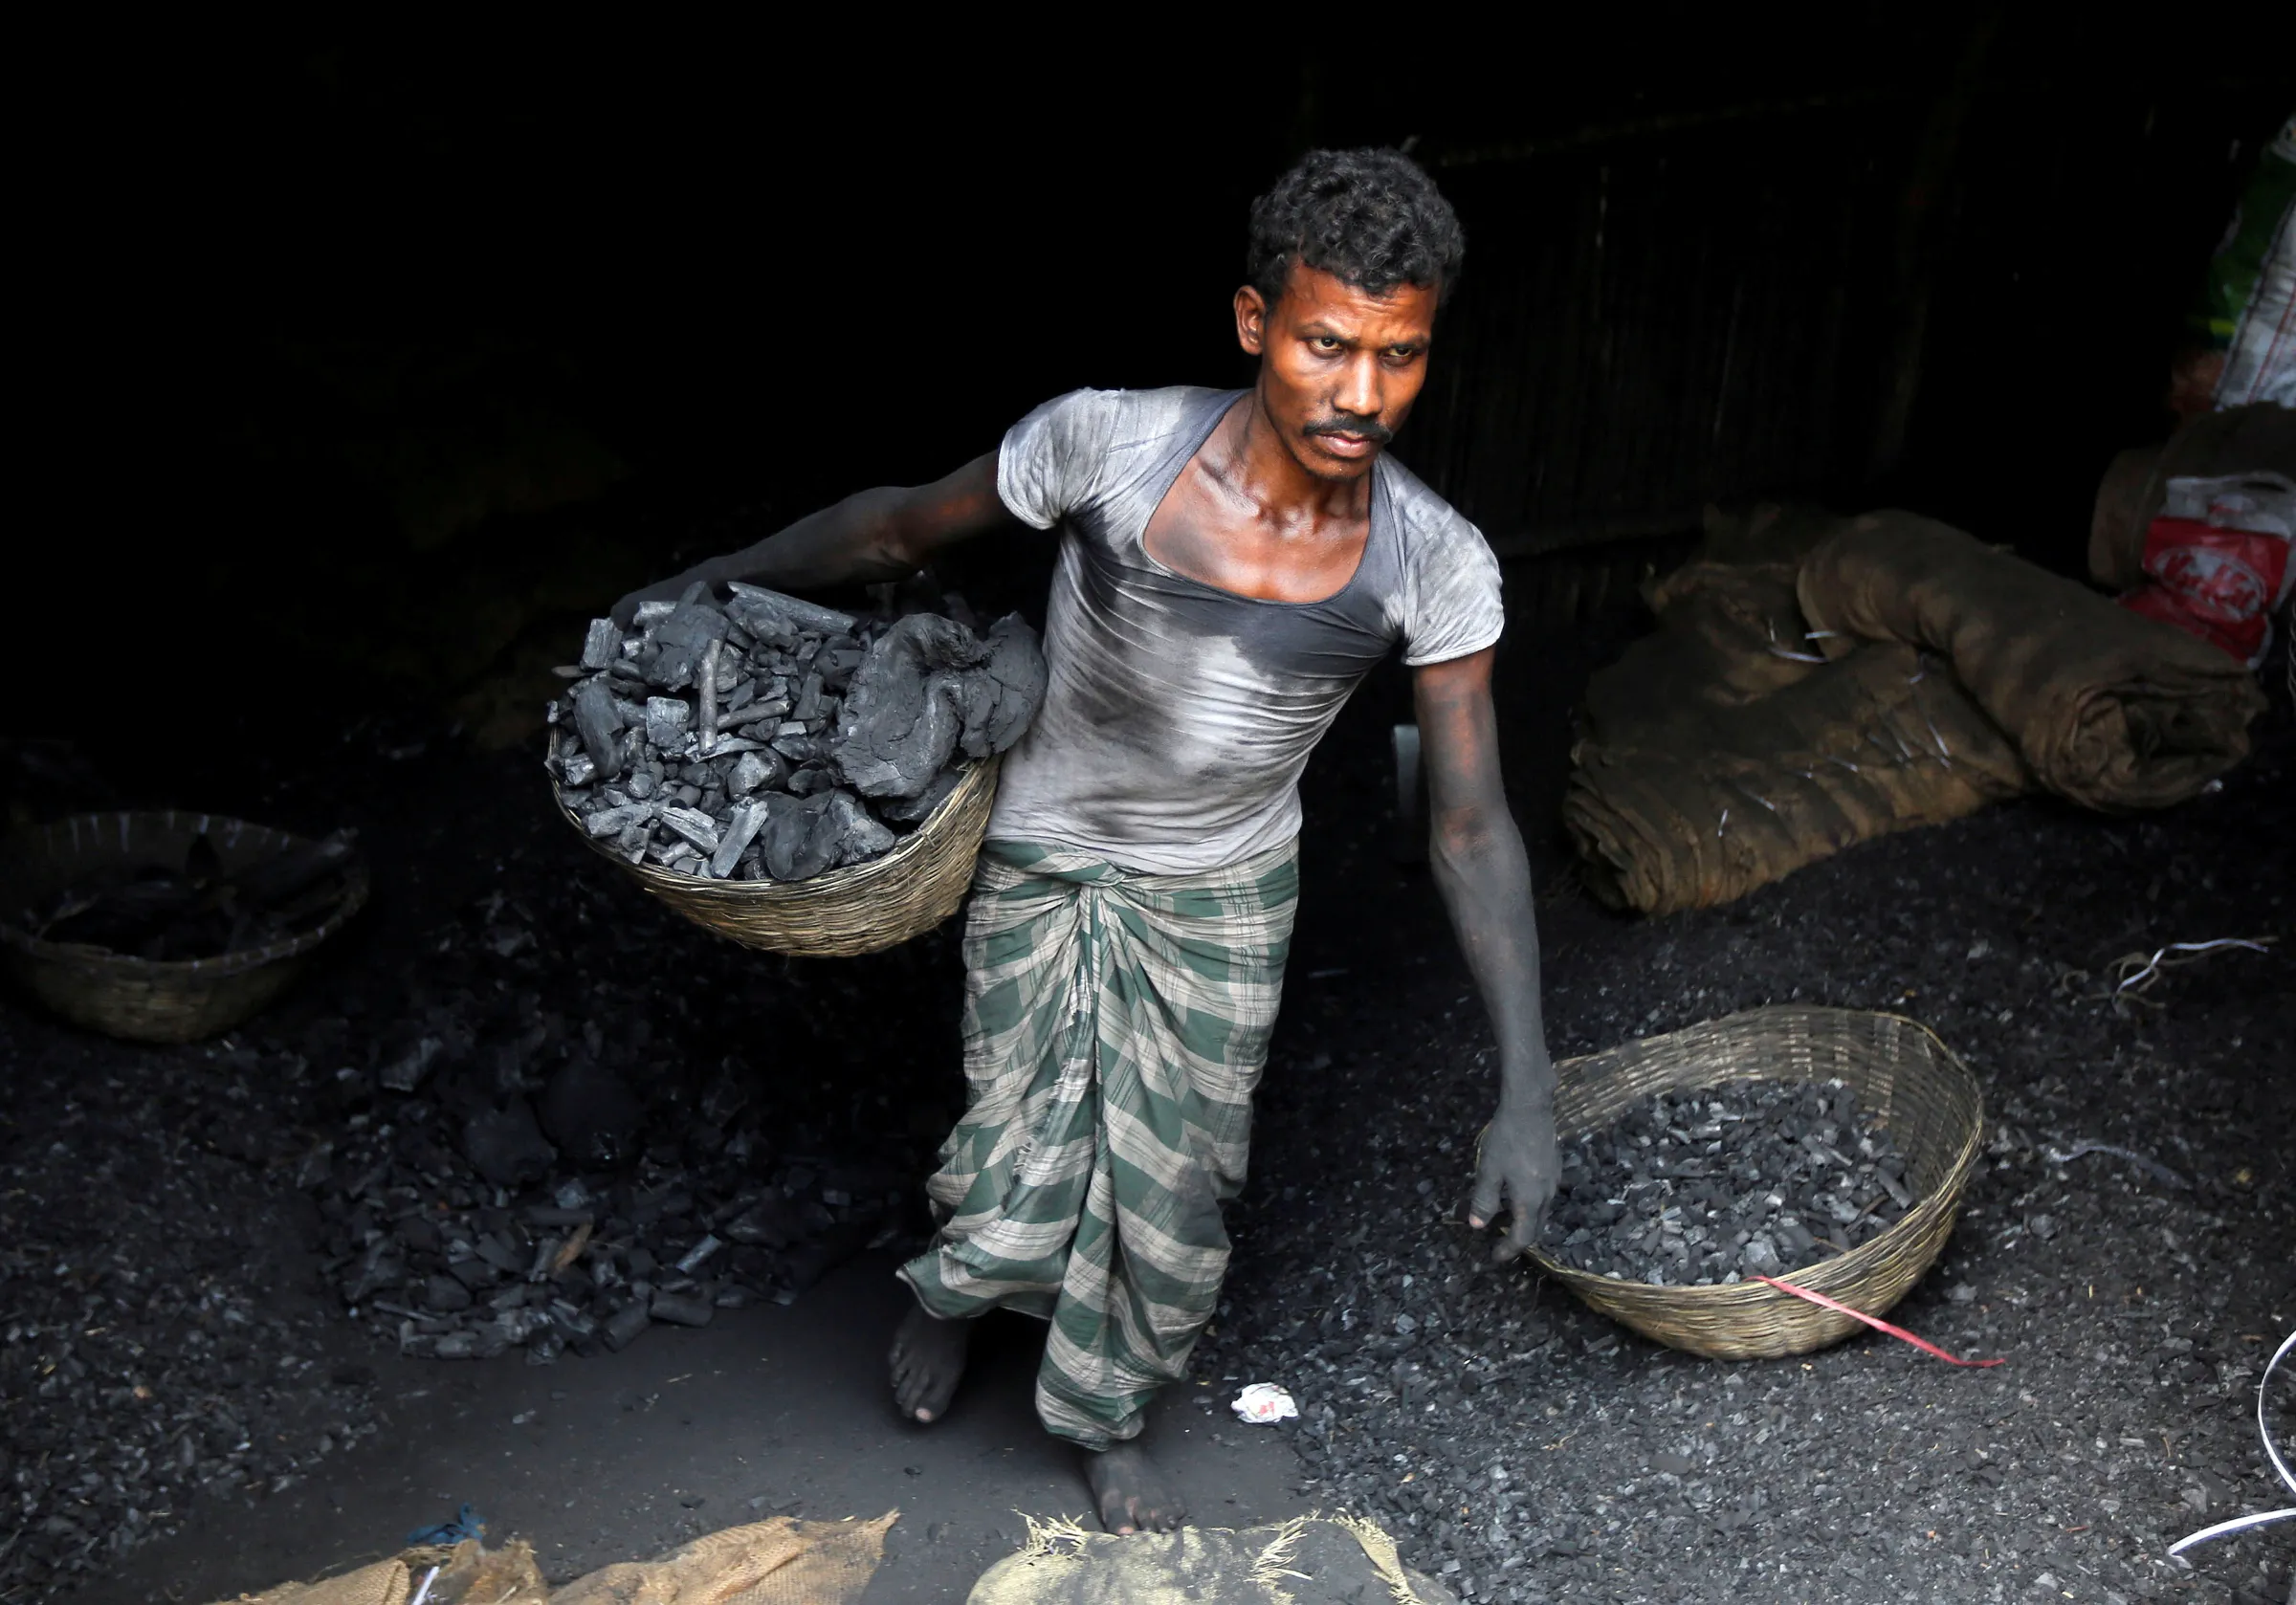 A worker carries coal in a basket in a industrial area in Mumbai, India May 31, 2017. REUTERS/Shailesh Andrade